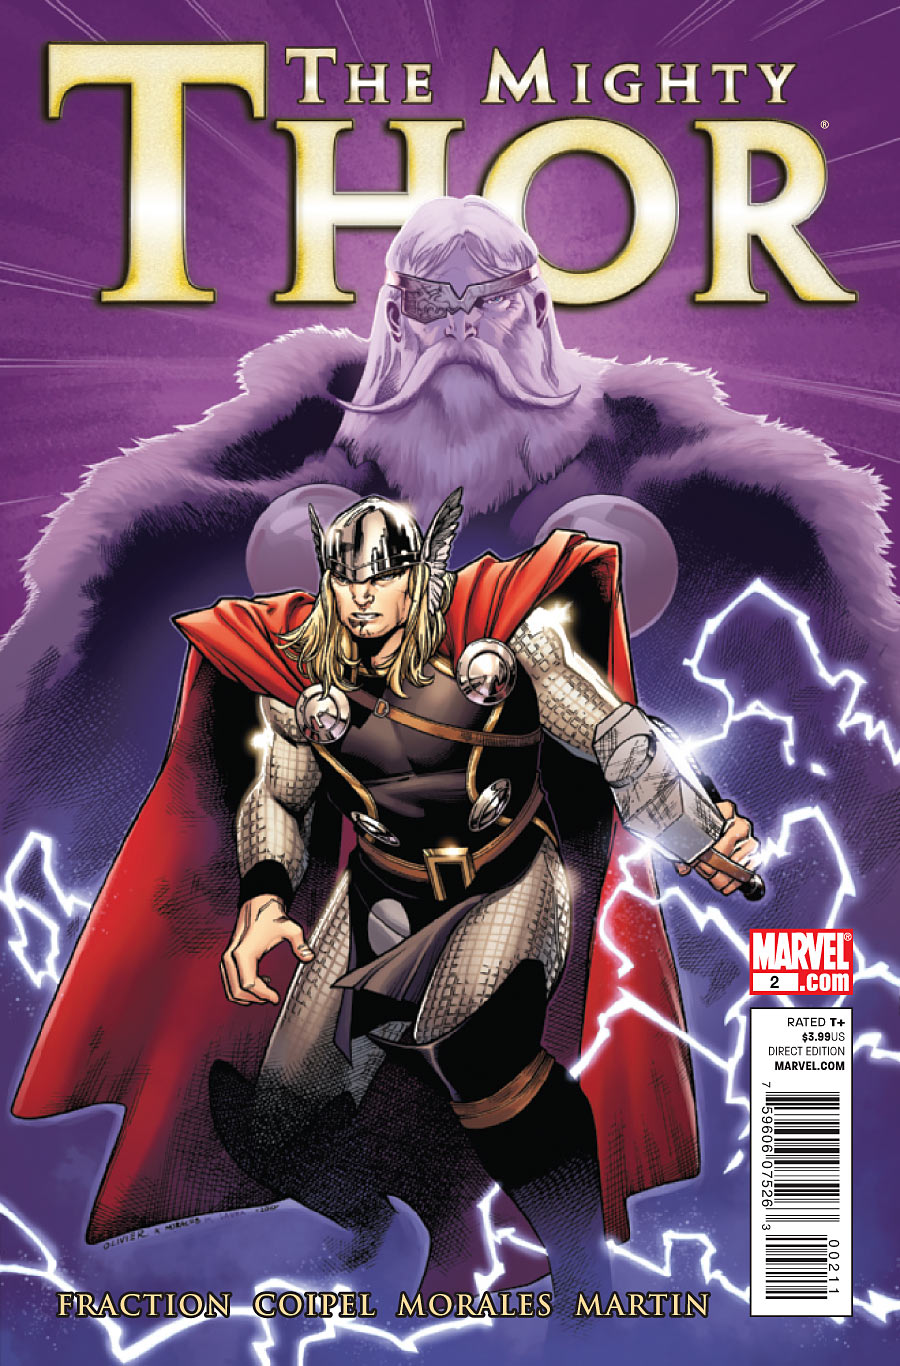 The Mighty Thor Vol. 1 #2A